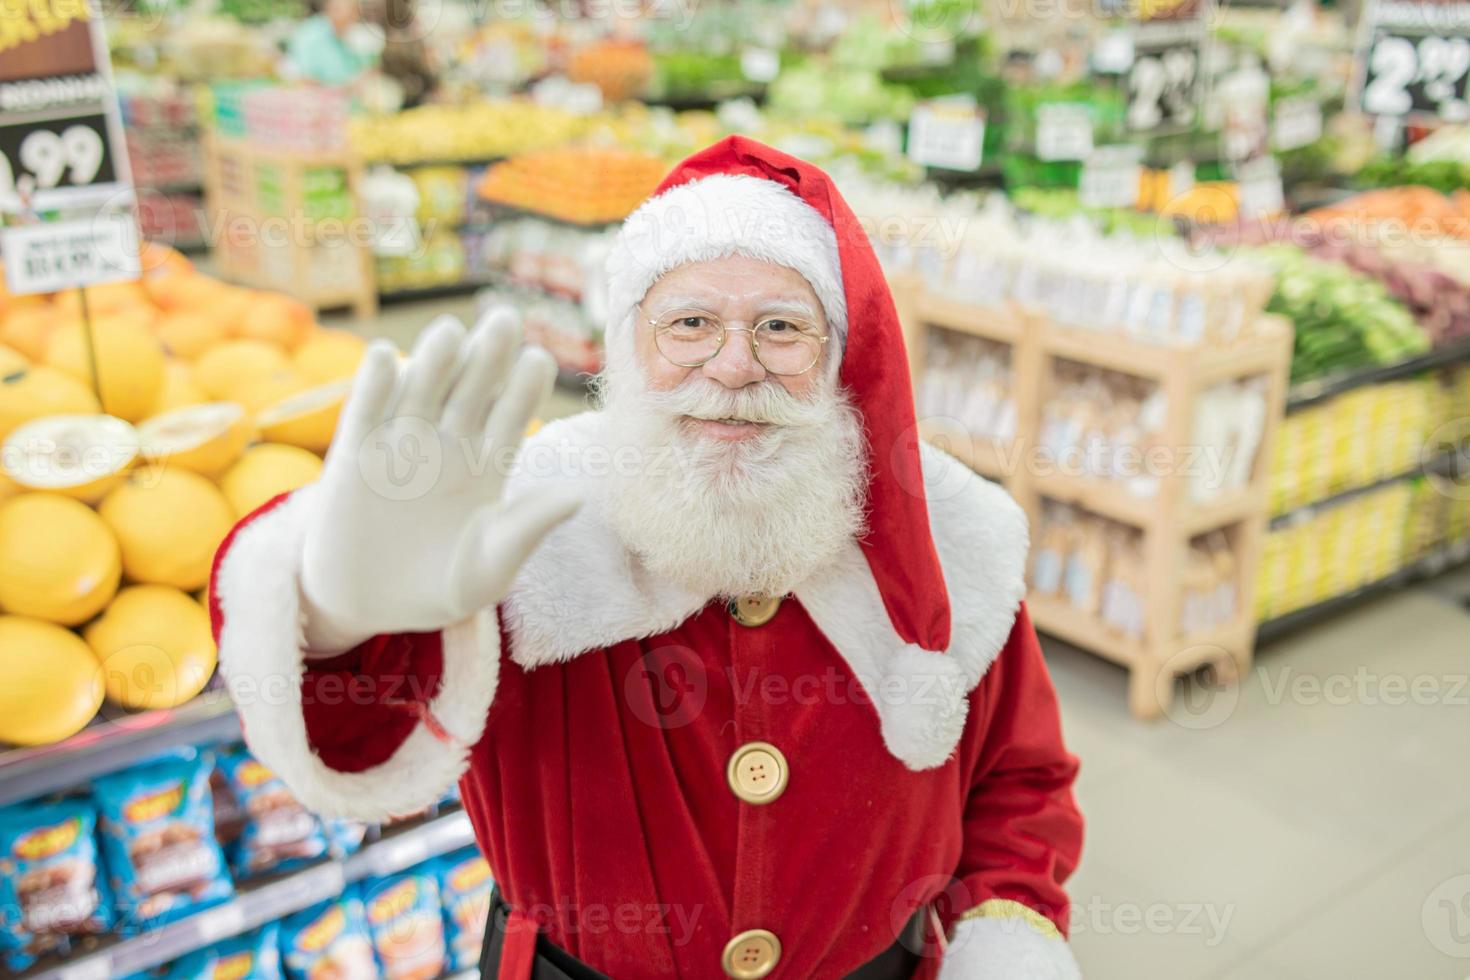 Santa Claus doing grocery shopping at the supermarket, he is pushing a full cart, Christmas and shopping concept. photo